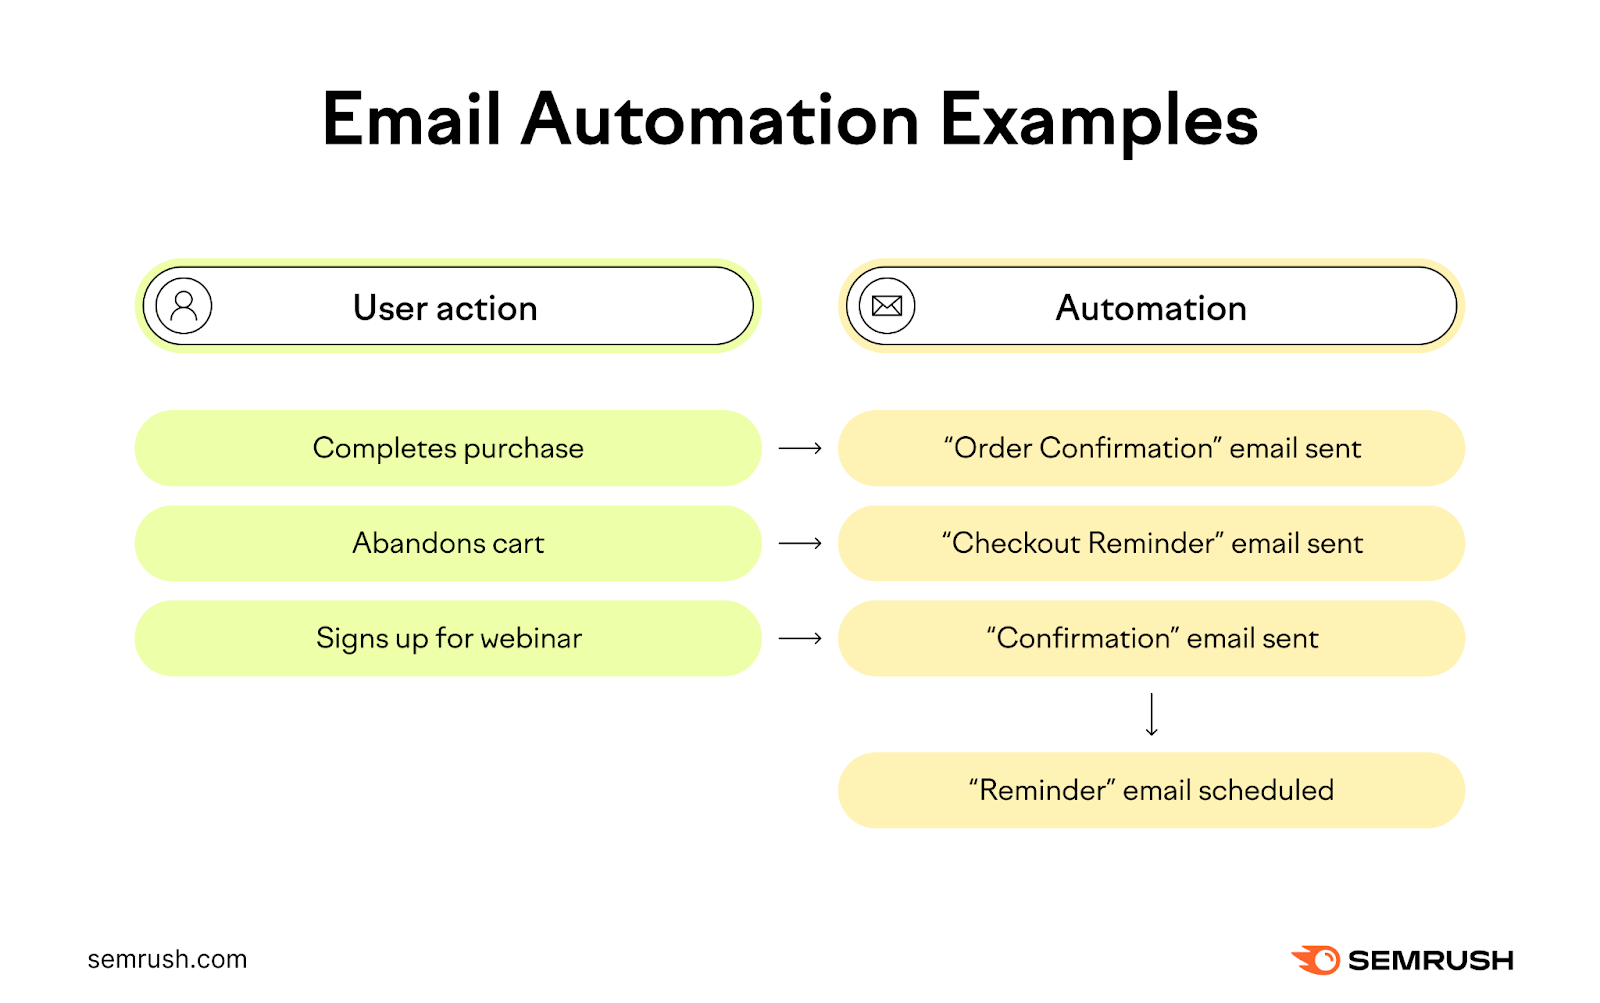 Email automation examples see  the idiosyncratic    enactment   of completing a acquisition  past    an bid   confirmation email is sent, oregon  the idiosyncratic    abandons cart past    a checkout reminder email is sent.